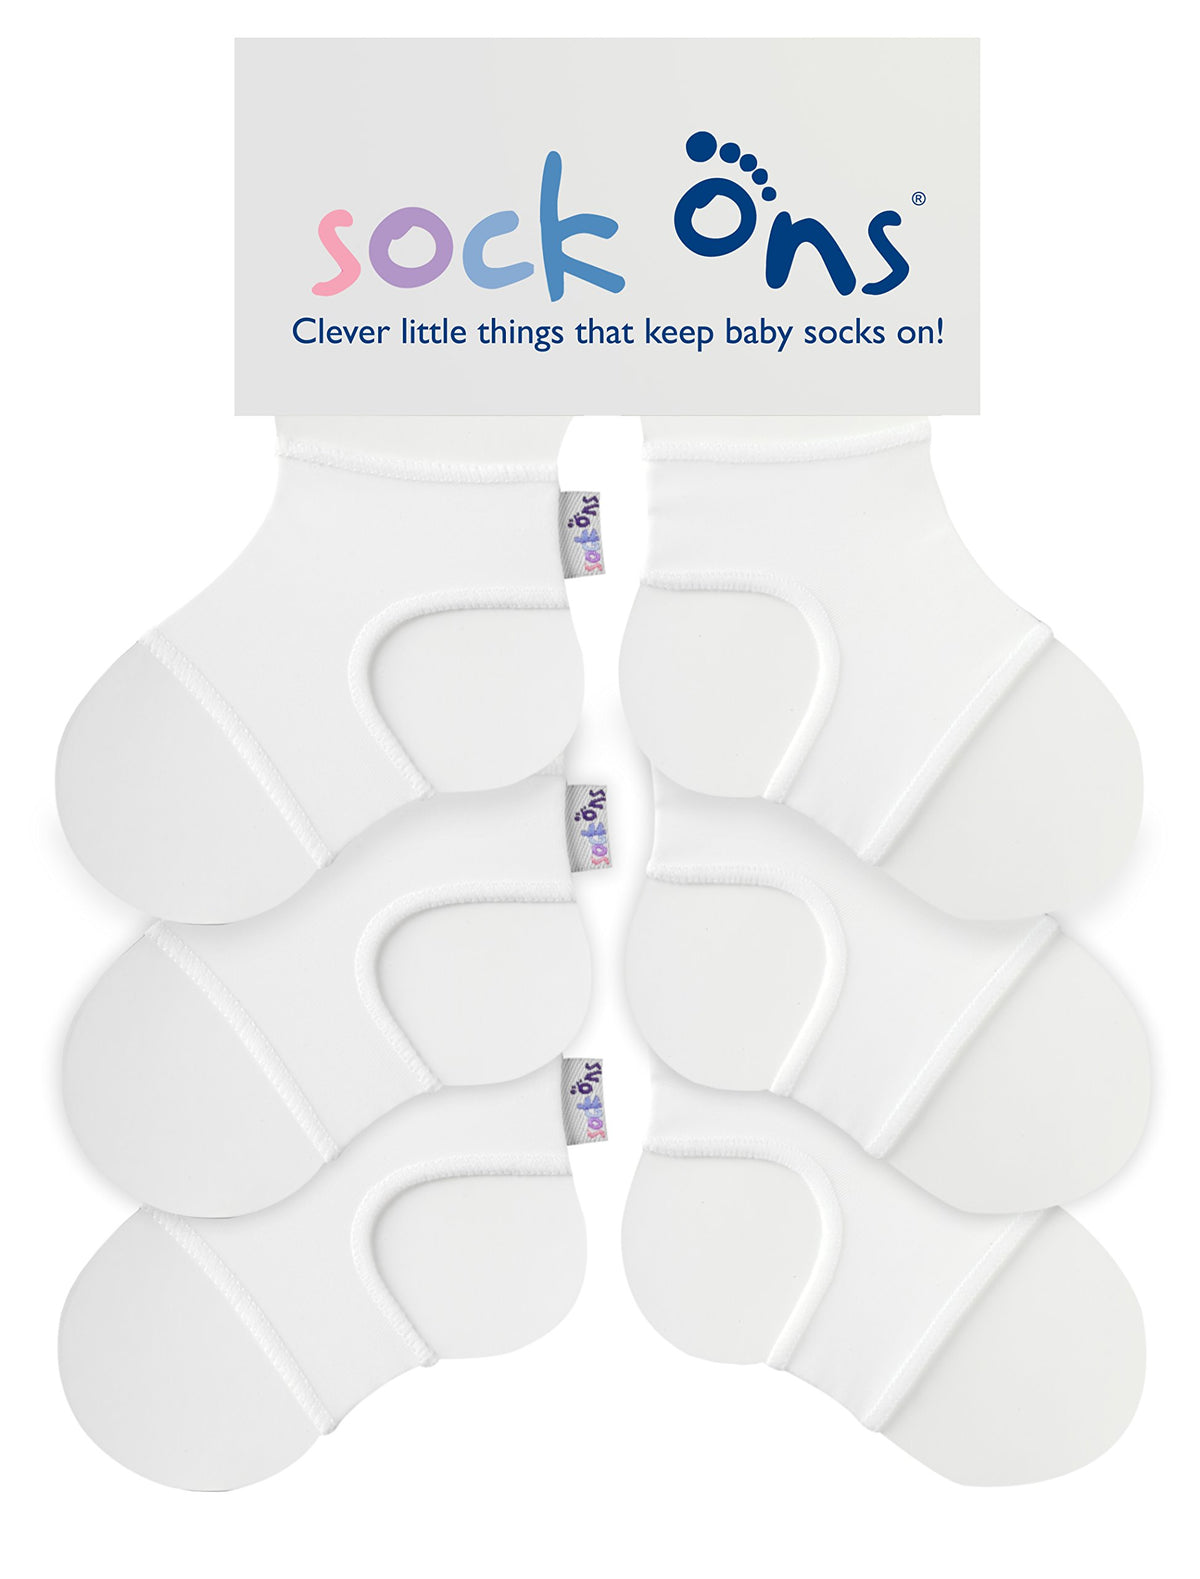 Sock Ons - Baby Sock Holders - 0-6 Months - 3 Pack (3 x White) - Amazing Value Pack - Keep Baby